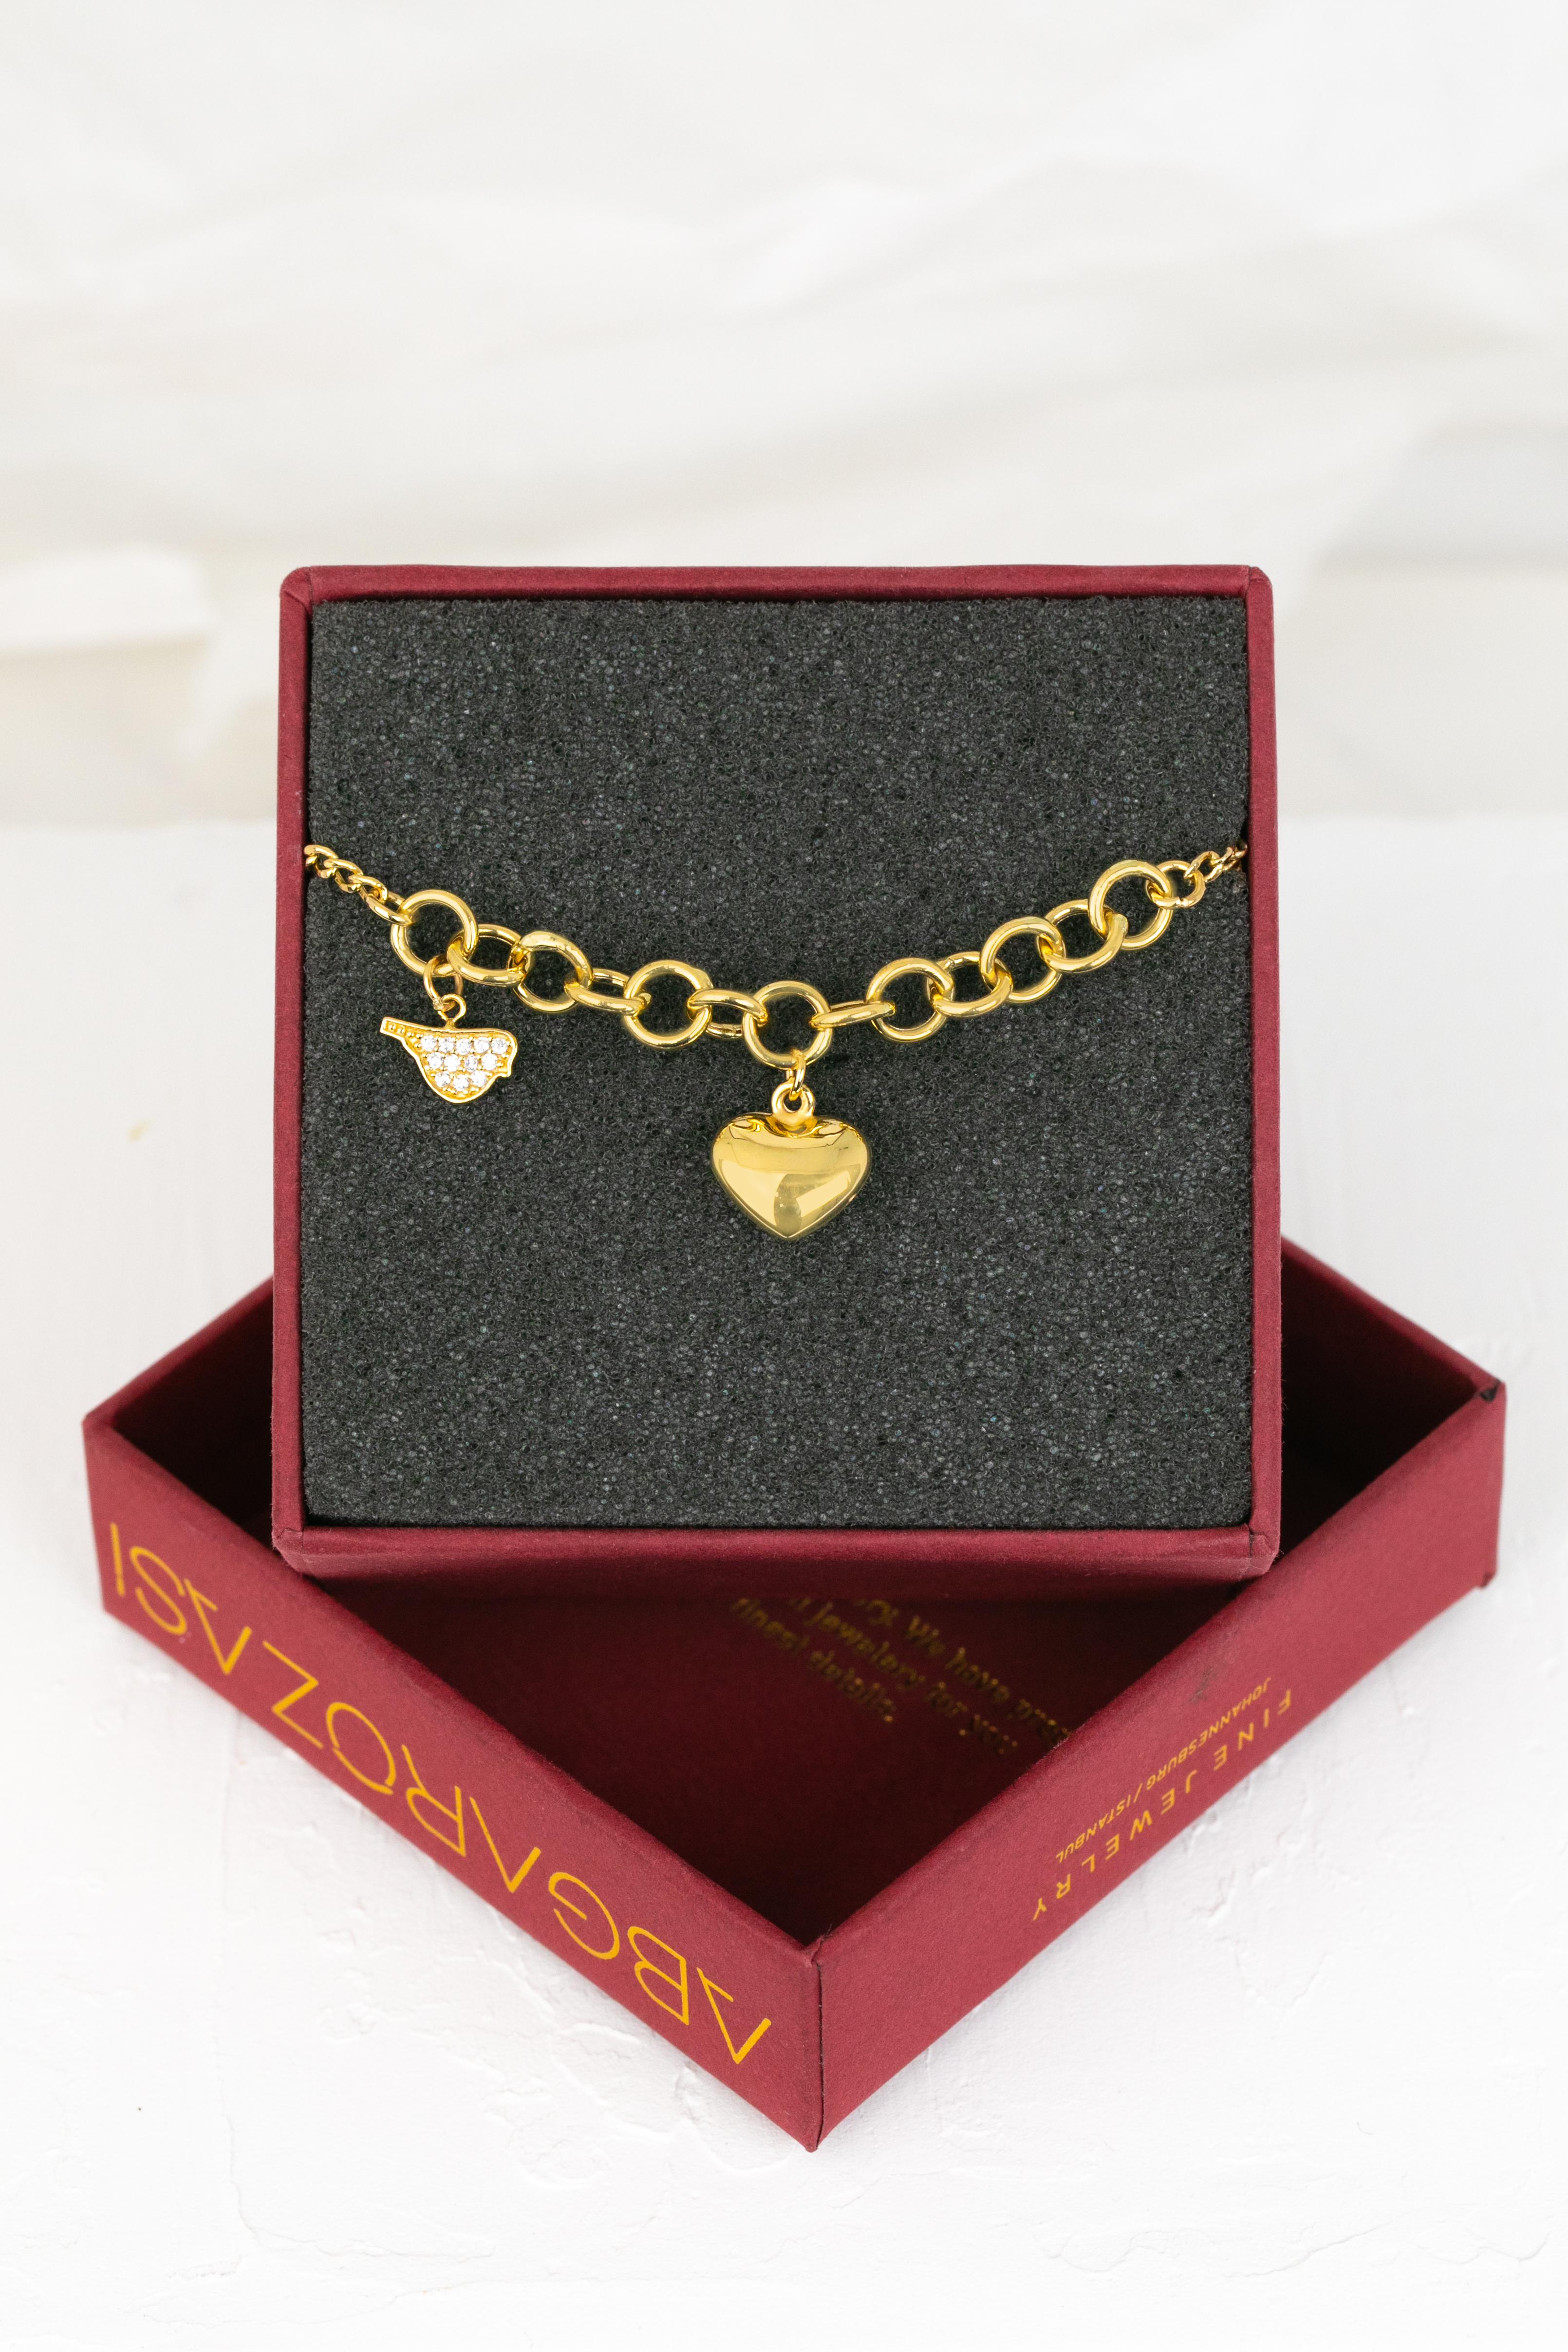 14K Gold Bracelet with Bold Chain, 14k Gold Chain Bracelet, Heart and Bird Model Sembol Bracelet delicate bracelet created by hands from chain to the stone shapes. Good ideas of dainty bracelet or stackable bracelet gift for her.

This bracelet was